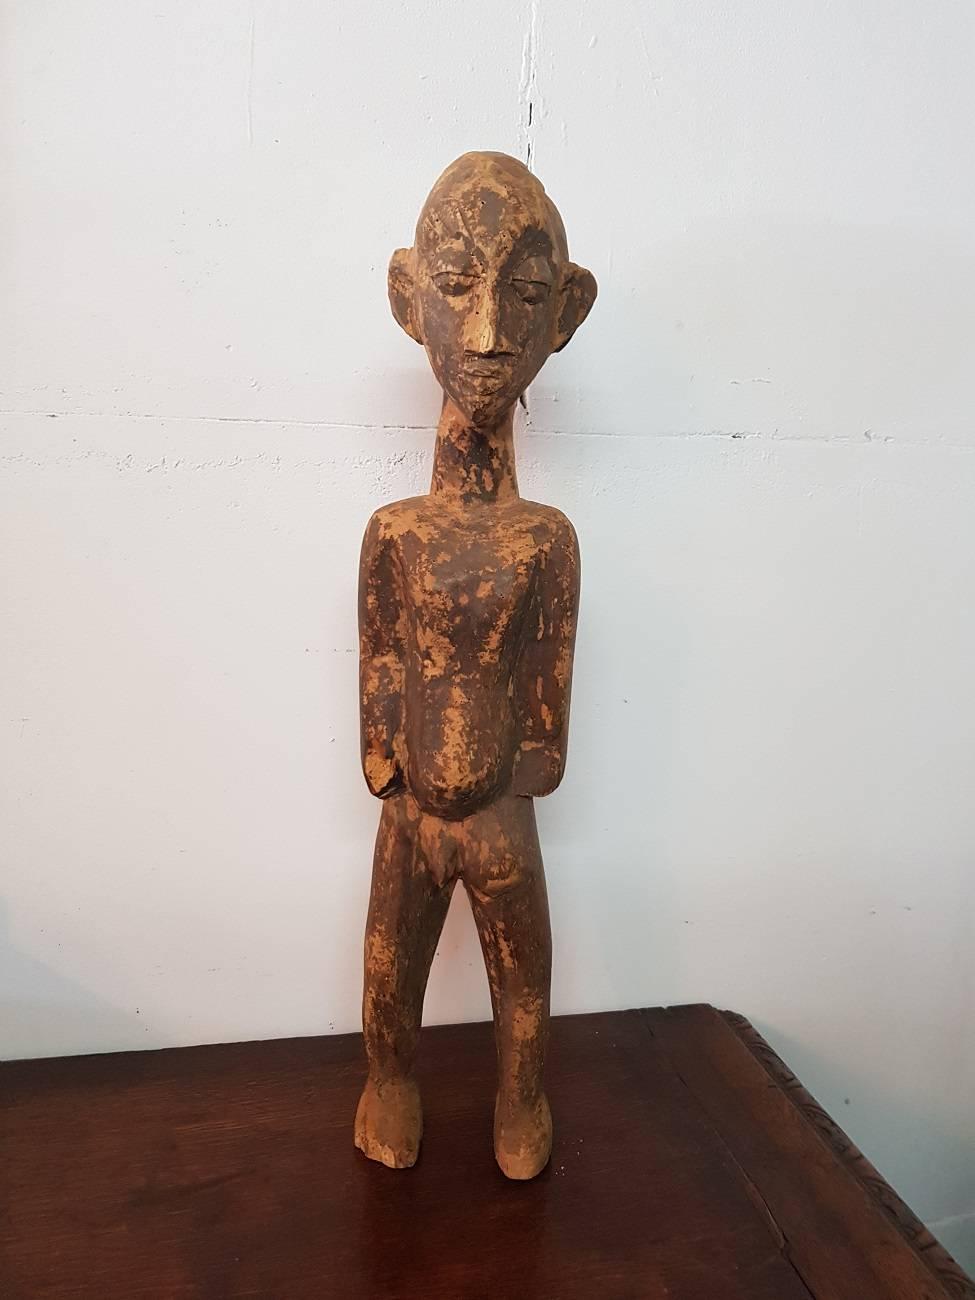 African wooden sculpture from the 1940s of the Makonde tribe of Tanzania, Mozambique (it has some woodworm damage and has been treated).

The measurements are:
Depth 13 cm/ 5.1 inch.
Width 12 cm/ 4.7 inch.
Height 56 cm/ 22 inch.